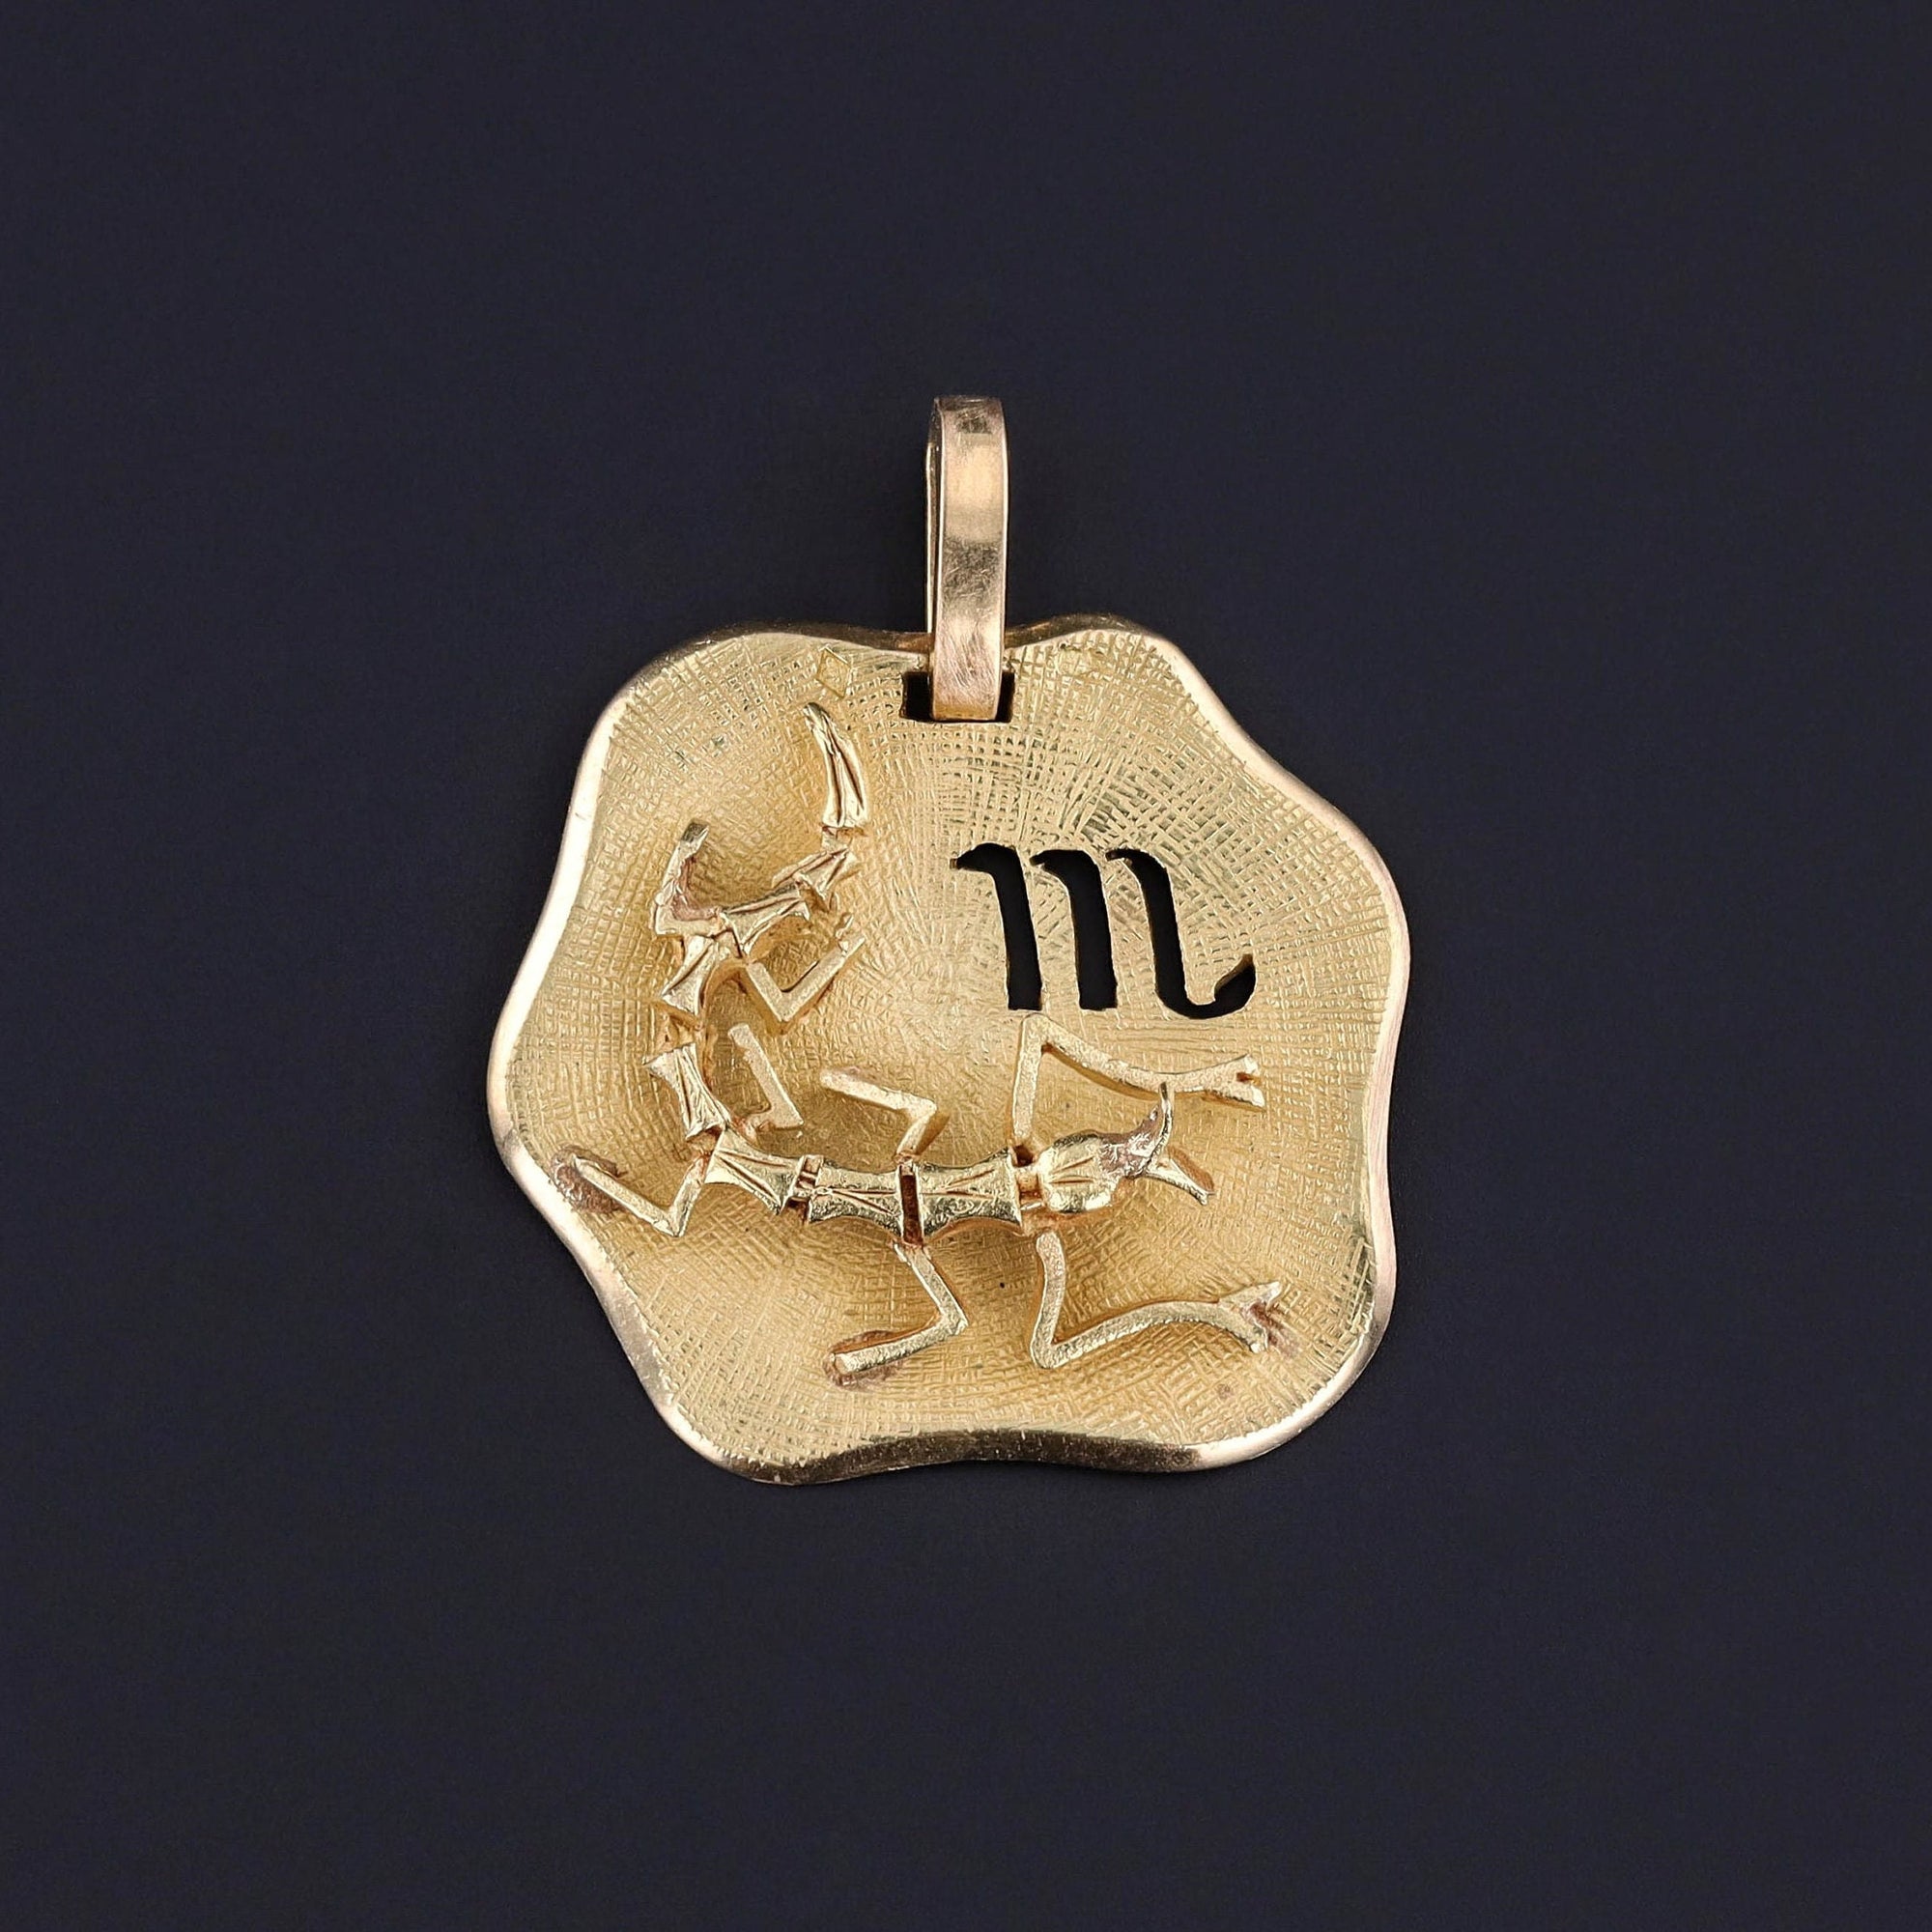 An 18k gold zodiac pendant for a Scorpio. The pendant features the symbol for the Scorpio zodiac sign and also a scorpion. The 3D piece is in great condition and solid gold. Perfect for any Scorpio or jewelry lover.